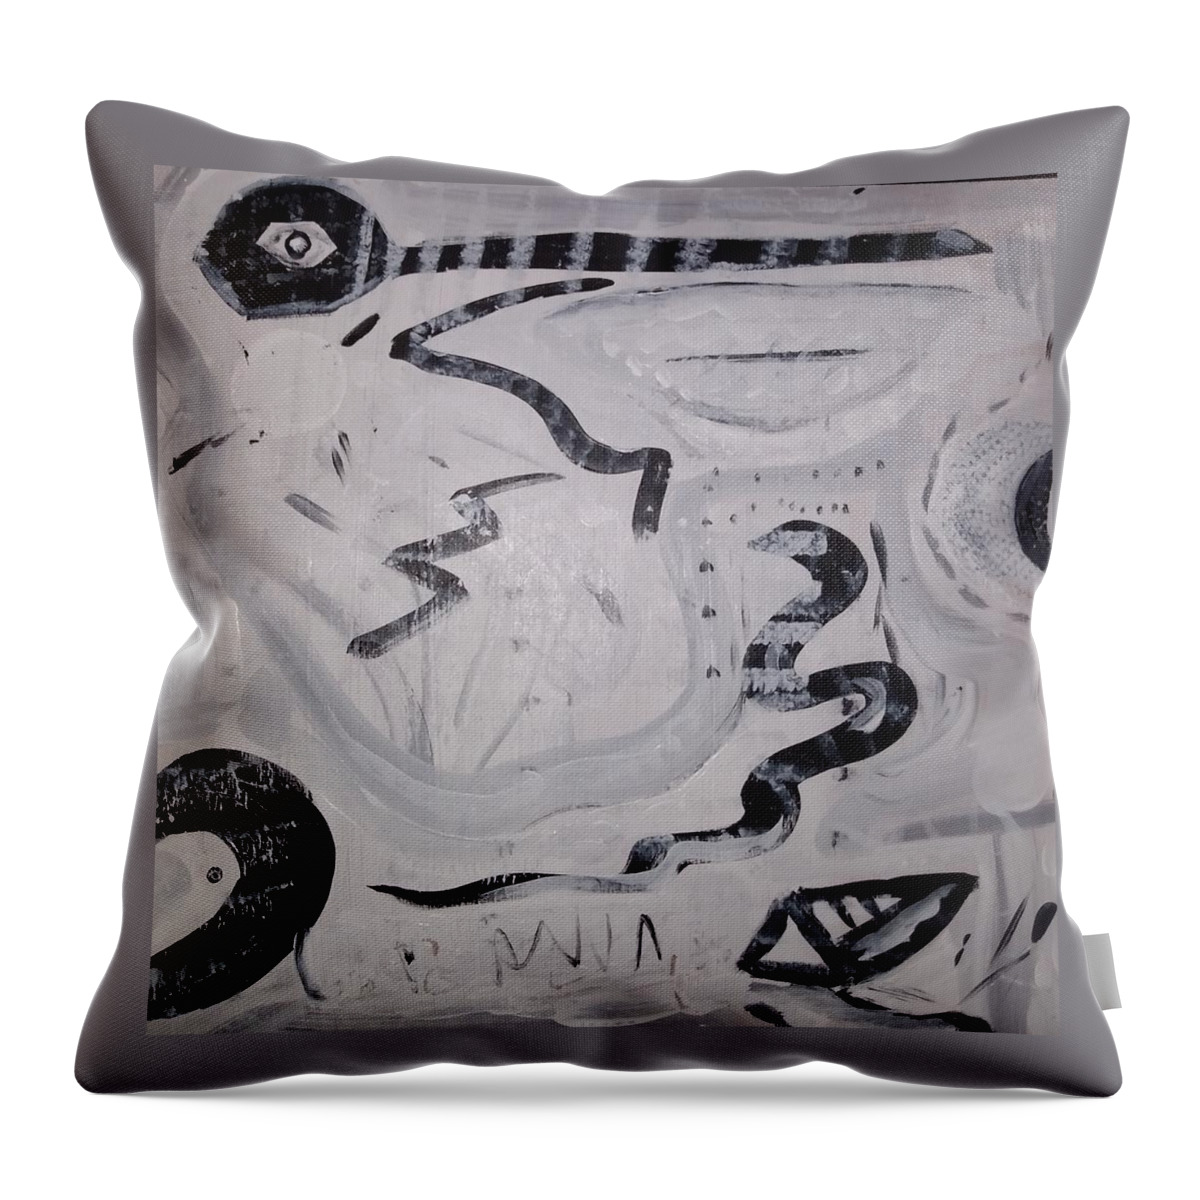 Black And White Throw Pillow featuring the painting They Are Coming by Suzanne Berthier